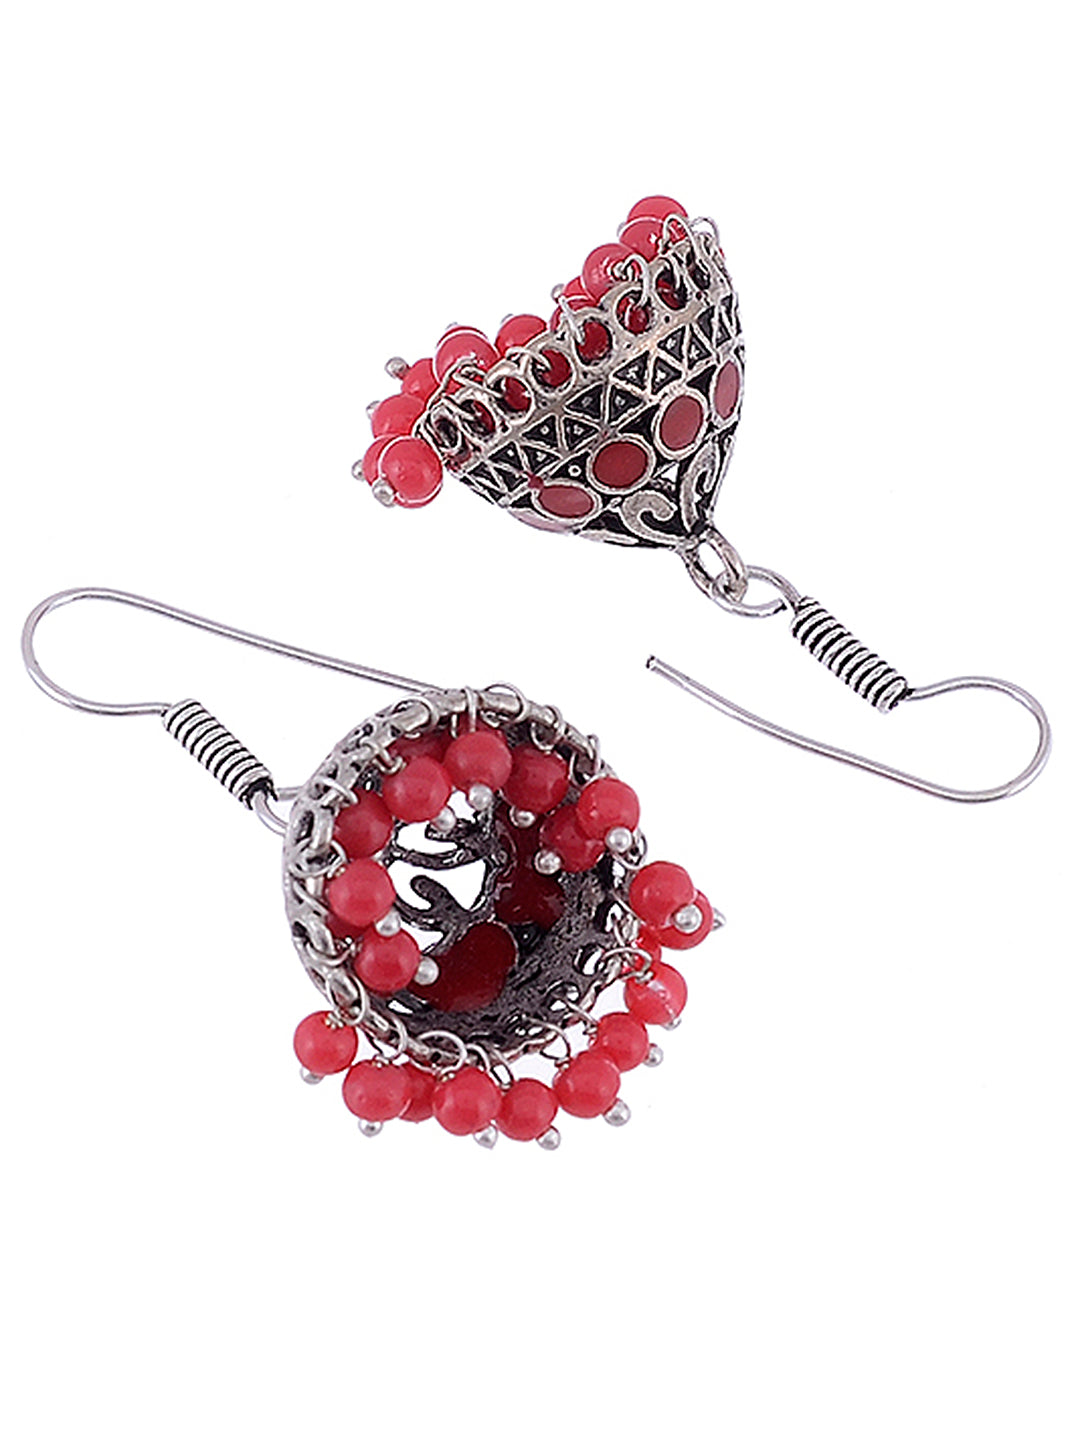 Silver Toned & Red Circular Jhumkas Earrings for Women Online